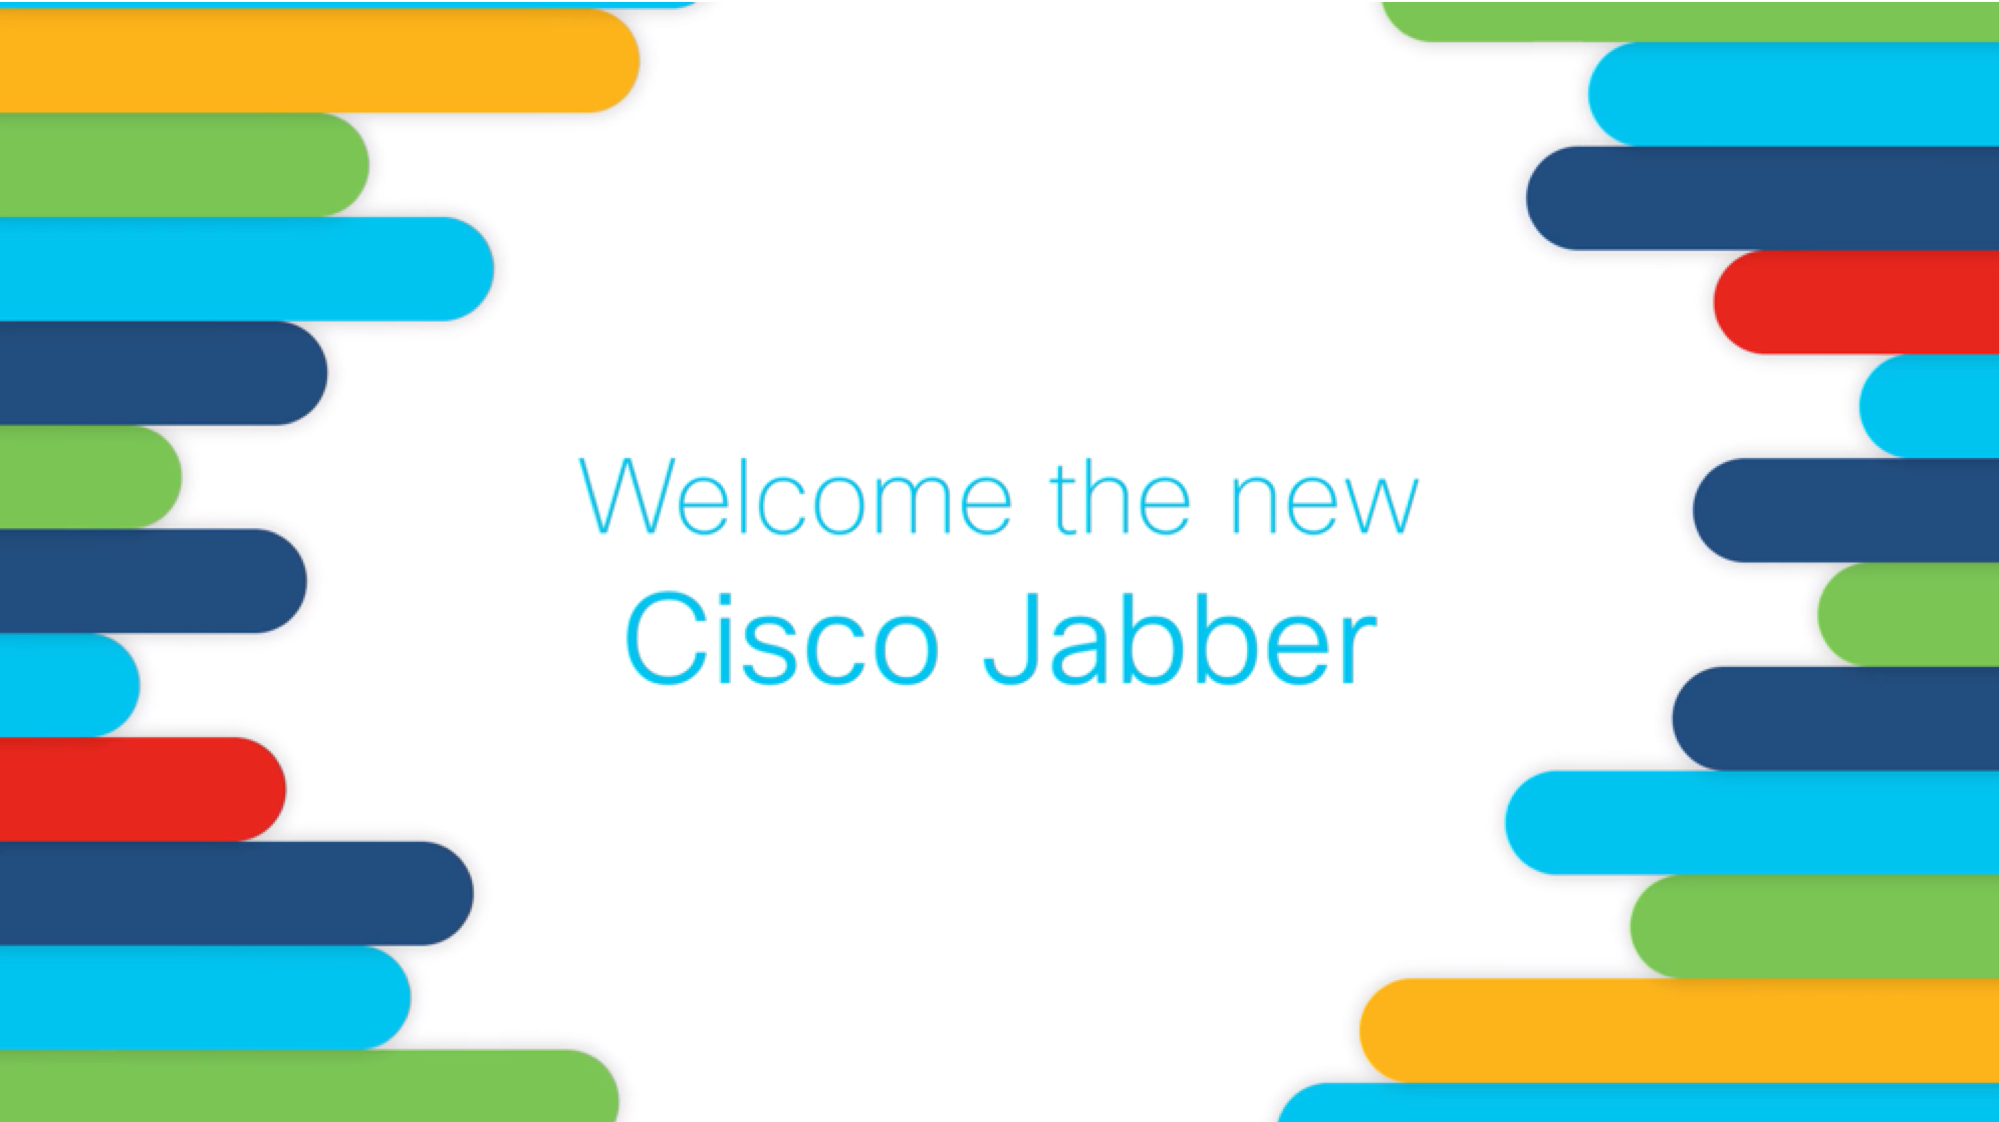 Welcome to the new Cisco Jabber